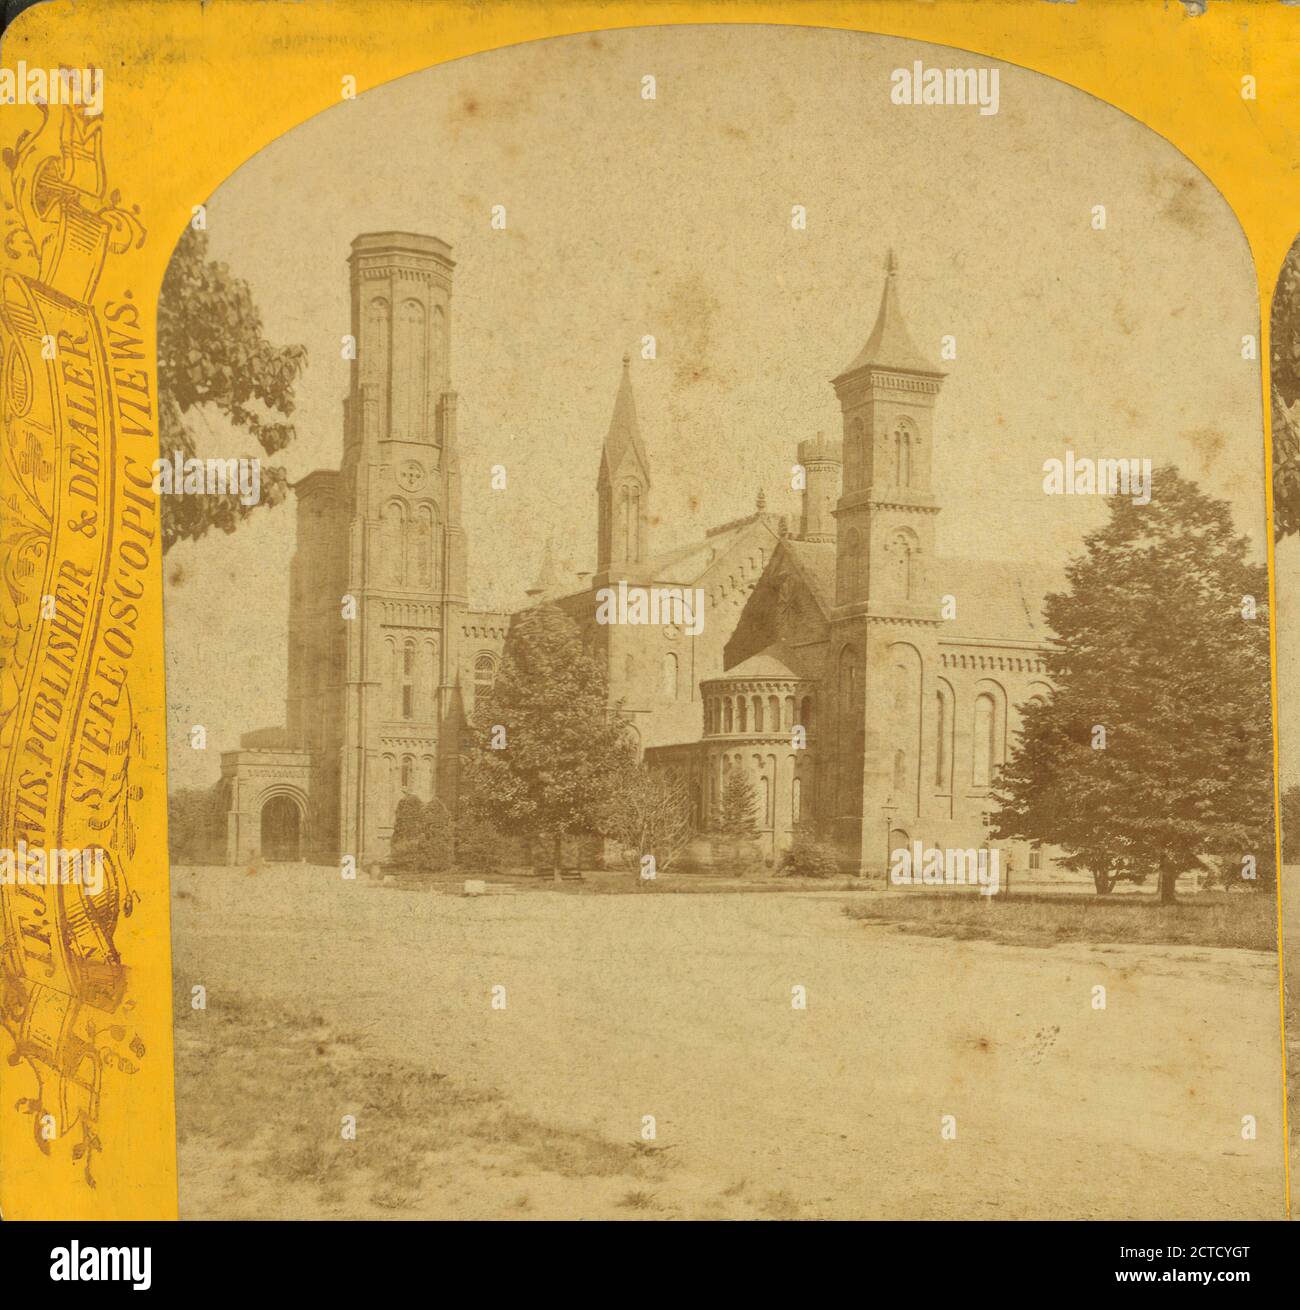 The Smithsonian Institution., Jarvis, J. F. (John F.) (b. 1850), Smithsonian Institution, 1859, Washington (D.C Stock Photo